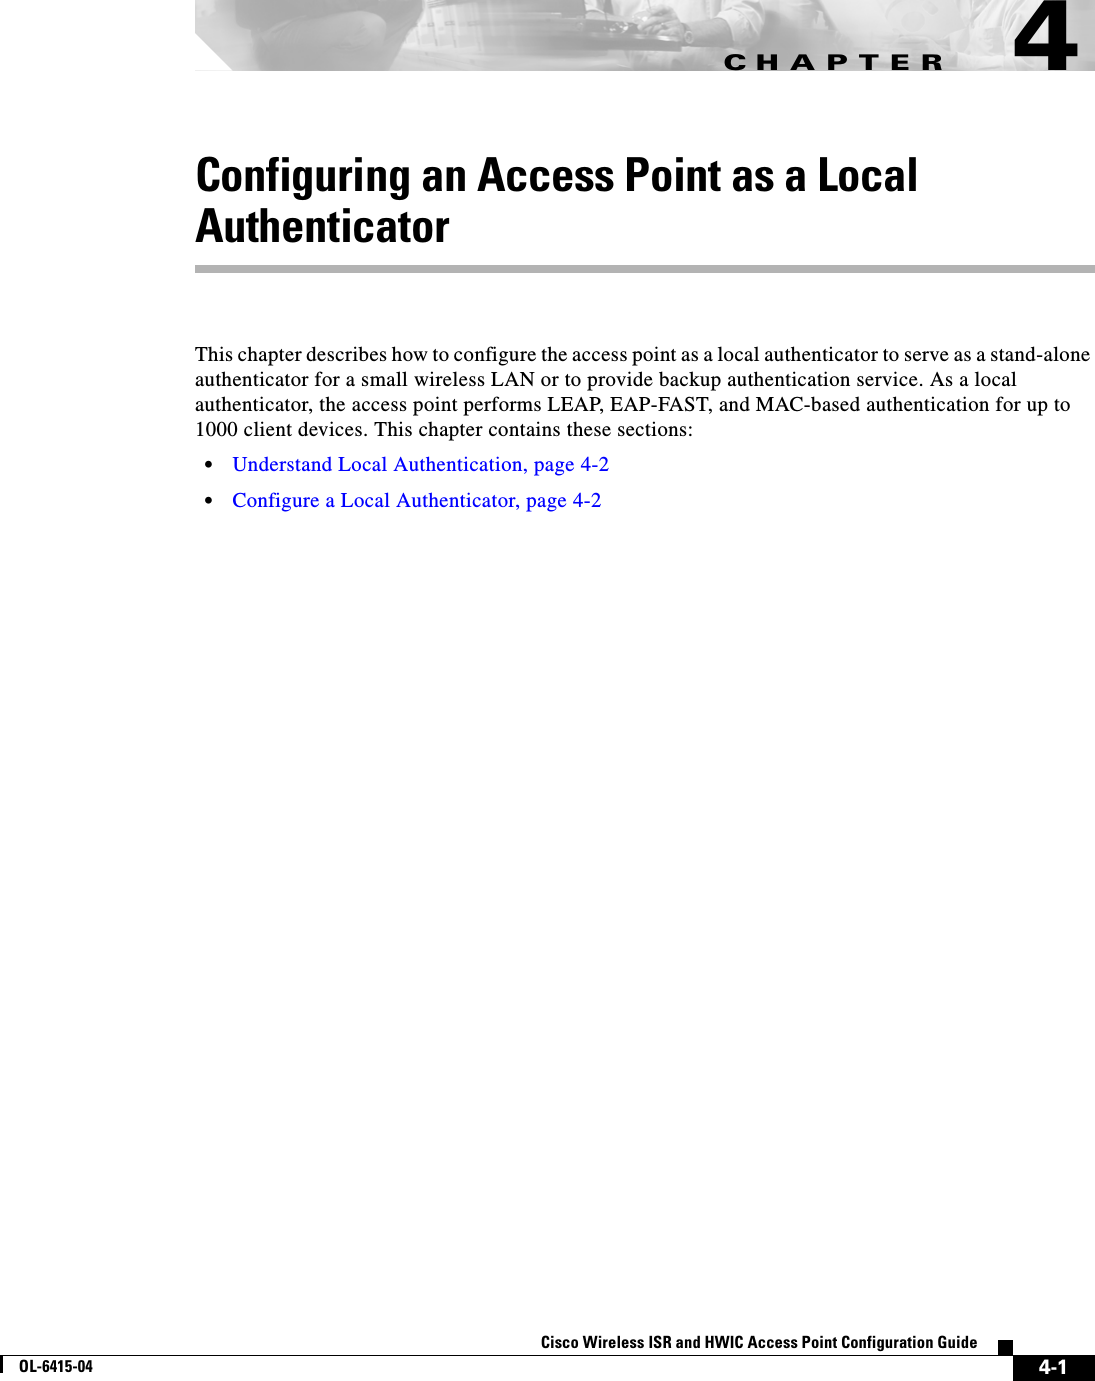 CHAPTER 4-1Cisco Wireless ISR and HWIC Access Point Configuration GuideOL-6415-044Configuring an Access Point as a Local AuthenticatorThis chapter describes how to configure the access point as a local authenticator to serve as a stand-alone authenticator for a small wireless LAN or to provide backup authentication service. As a local authenticator, the access point performs LEAP, EAP-FAST, and MAC-based authentication for up to 1000 client devices. This chapter contains these sections:  • Understand Local Authentication, page 4-2  • Configure a Local Authenticator, page 4-2